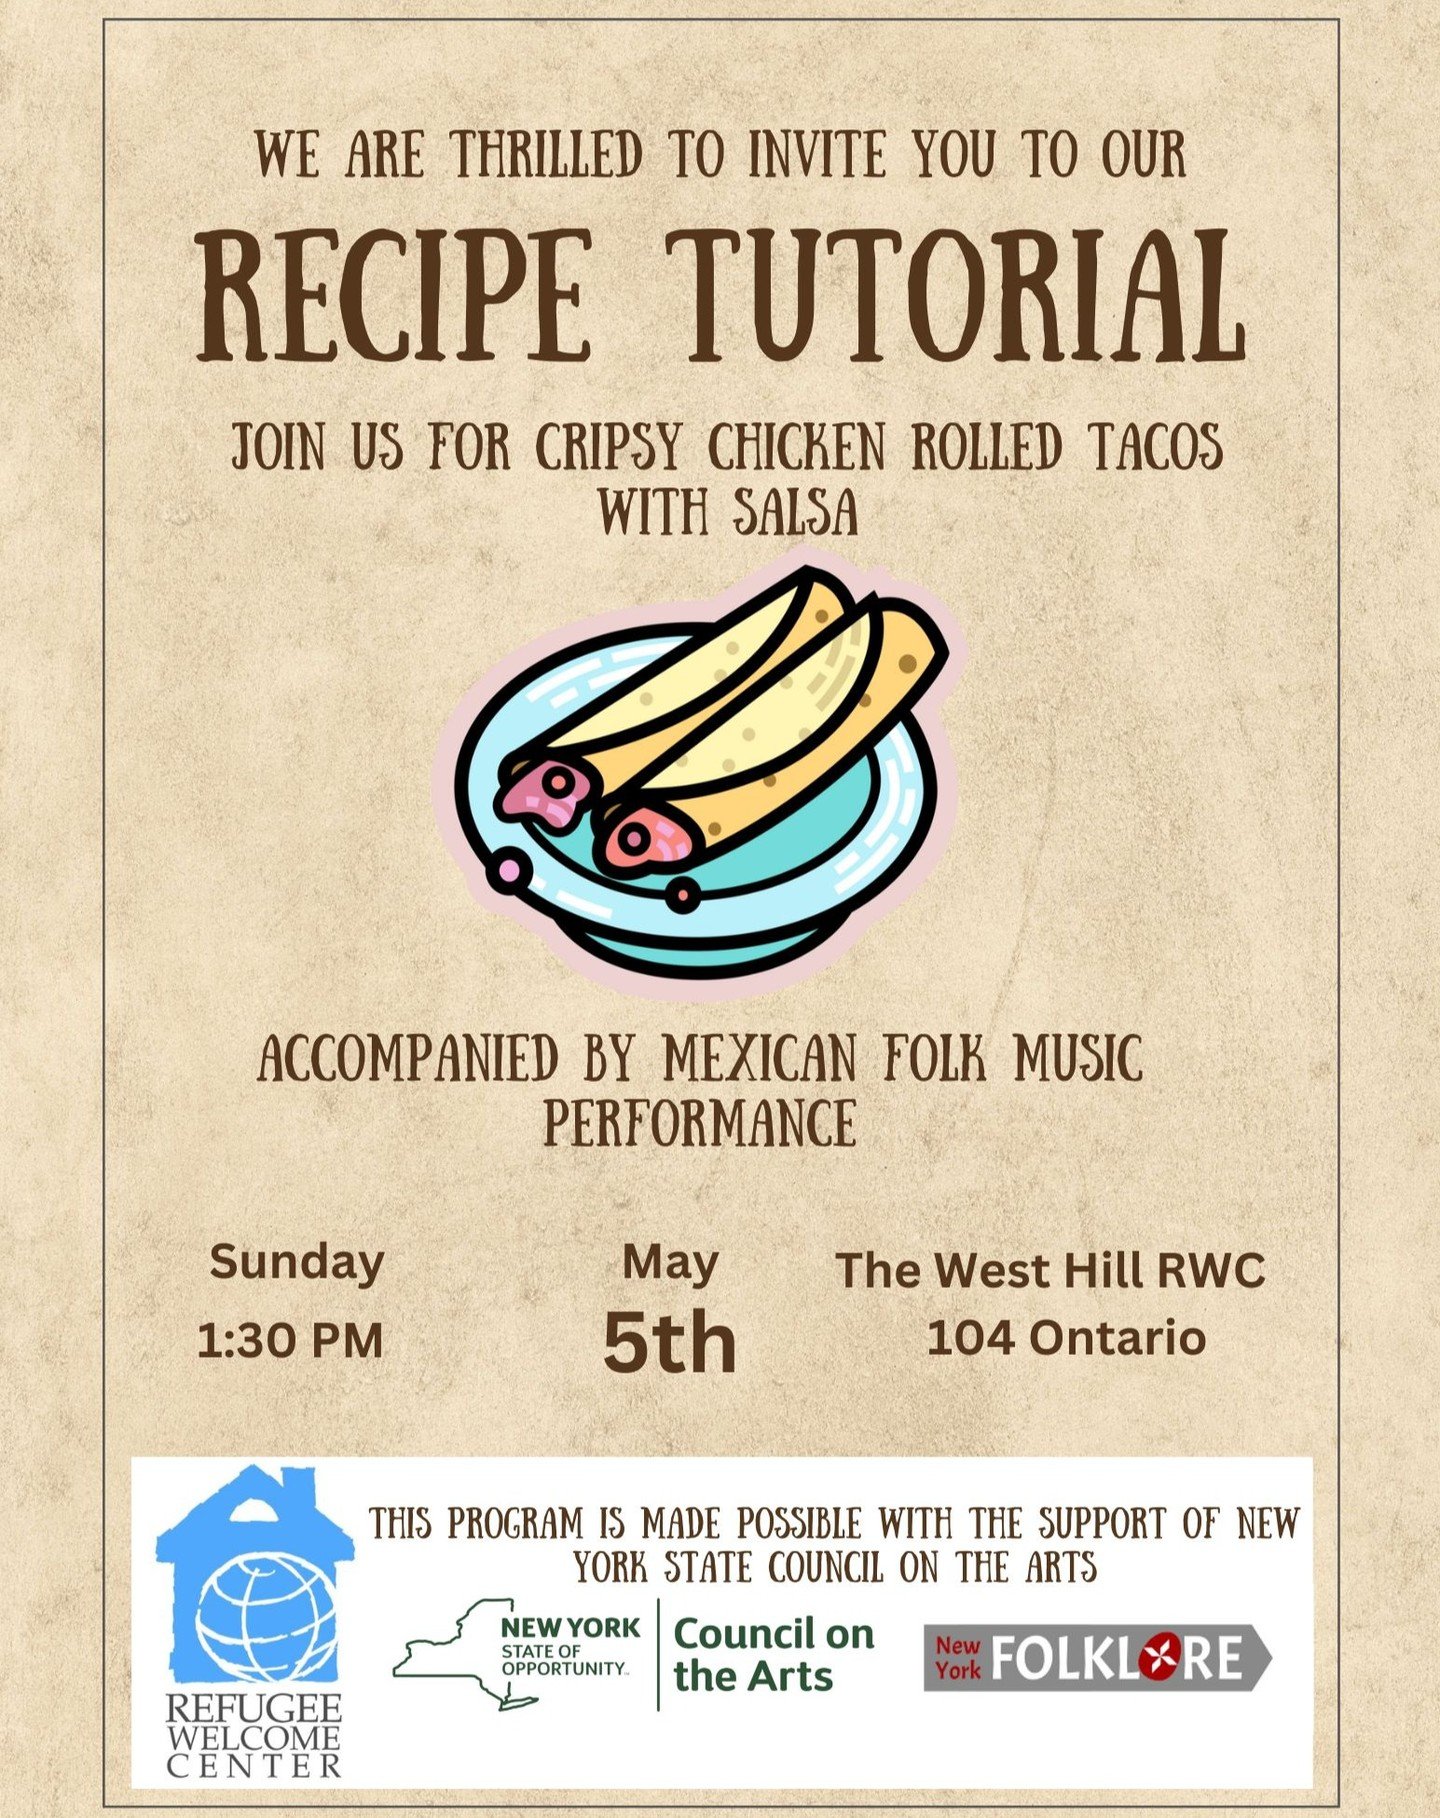 Come join us this Sunday for a delicious recipe tutorial: let's learn how to make Crispy Chicken rolled Tacos with Salsa/Taquitos Dorados de Pollo Flautas!

A special musical performance will also accompany this event.

May 5th, 1:30pm !!
@nyfolklore